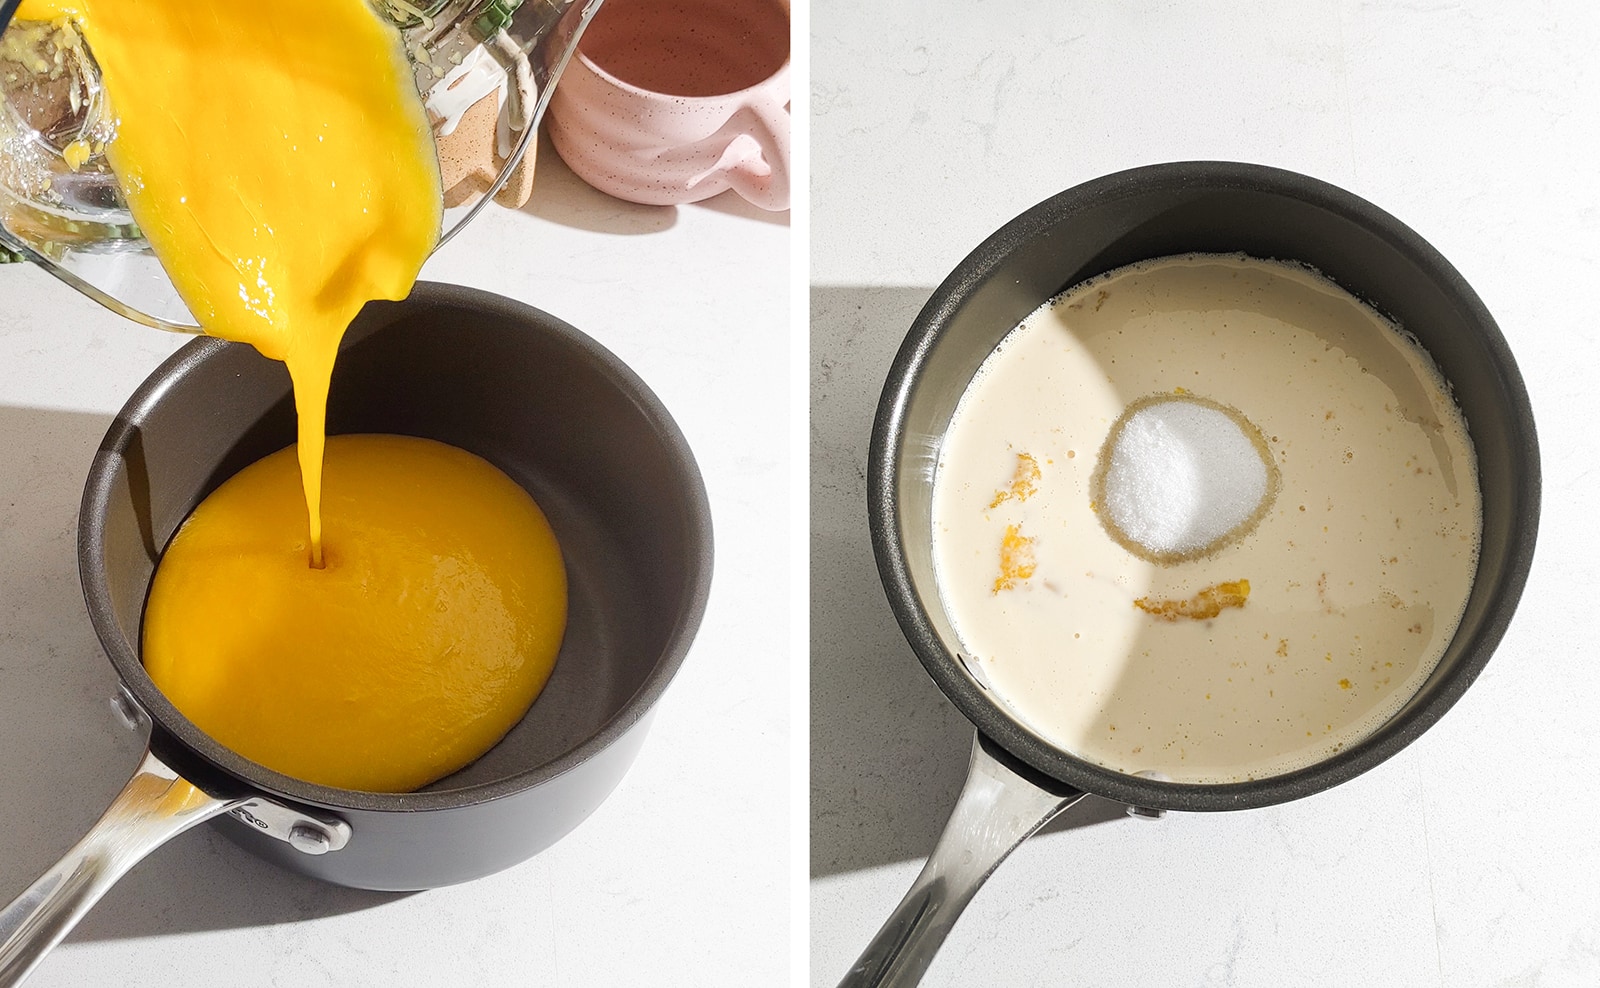 Left to right: pouring mango puree into pot; pot filled with mango puree, evaporated milk, and sugar.